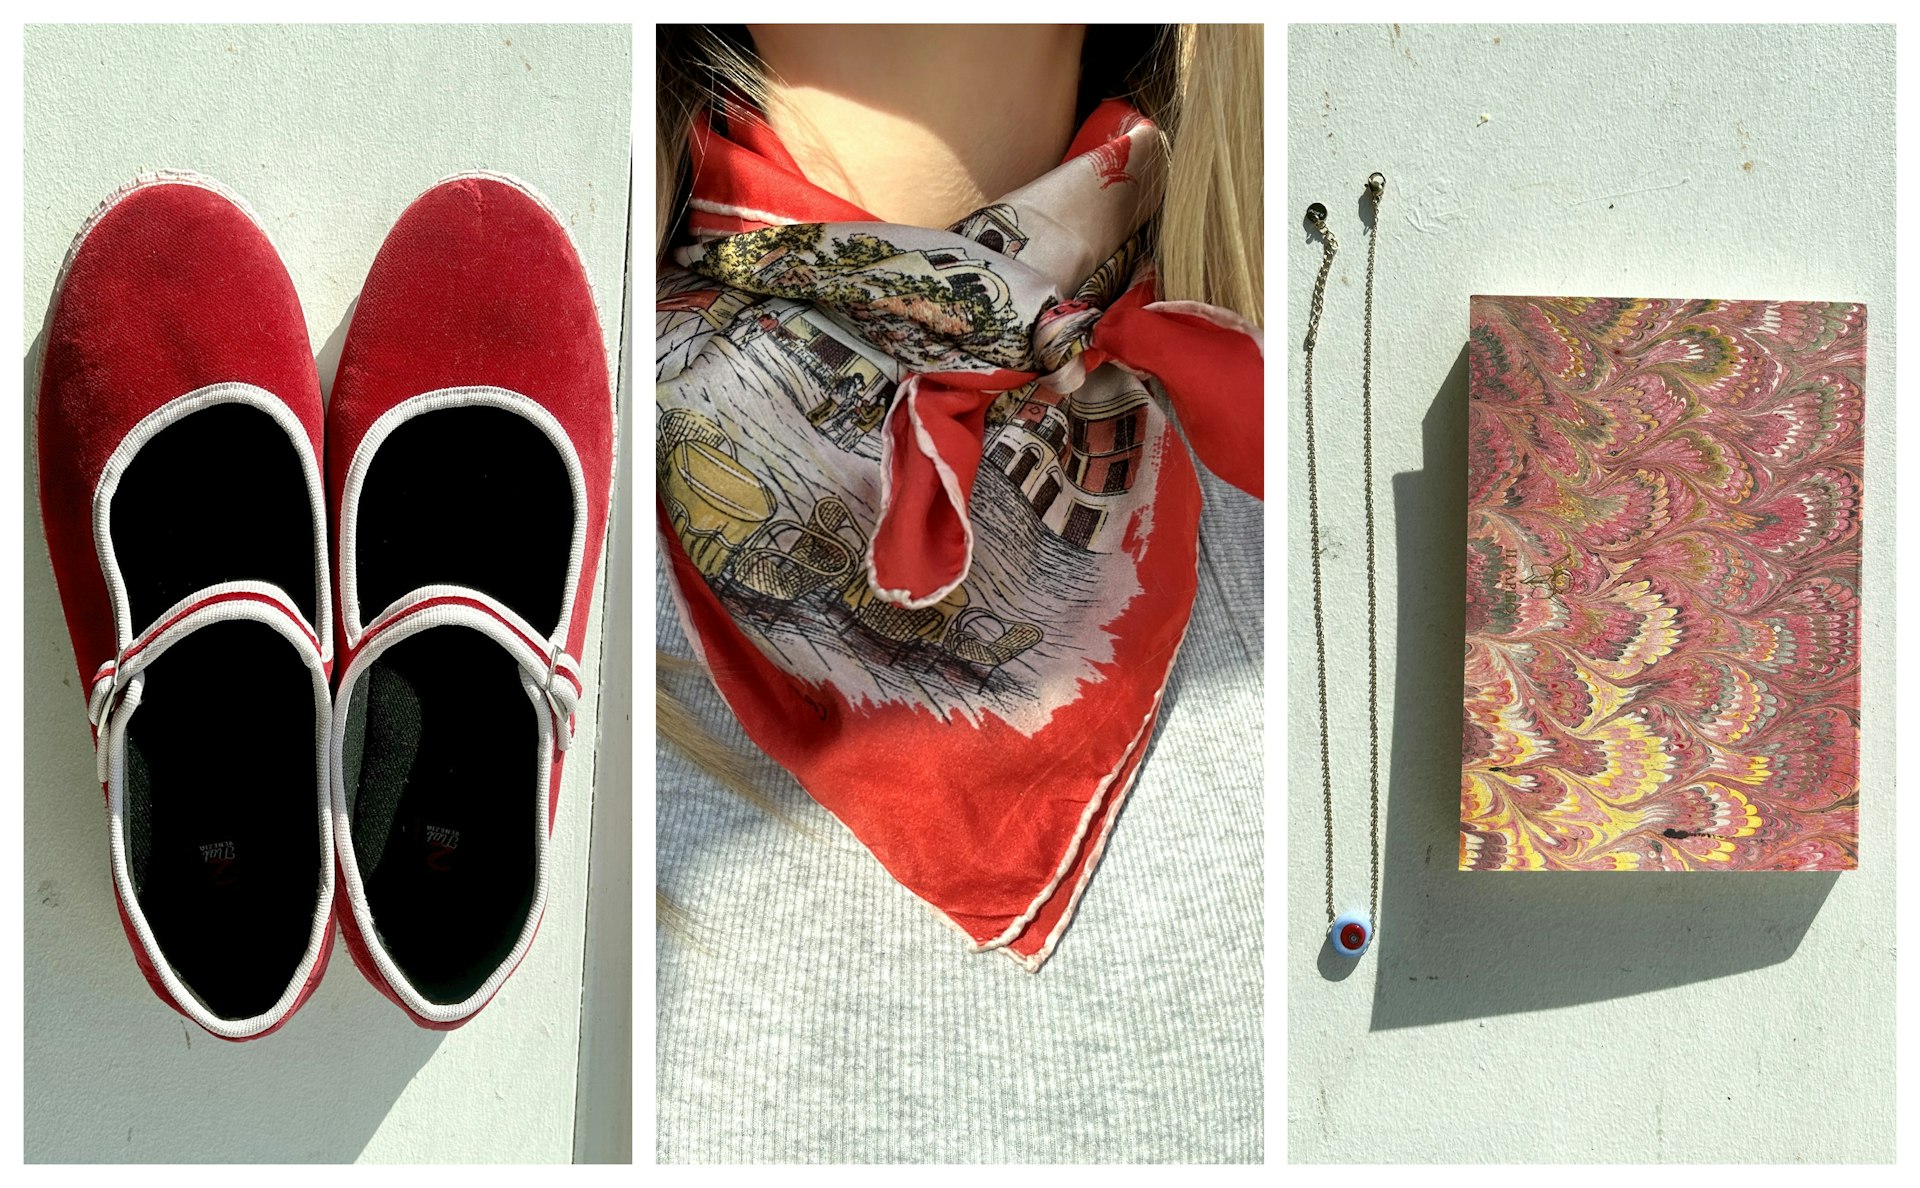 Right: a pair of red Mary Janes; Middle: a red neck scarf with illustrations of Capri; Right: a glass bead necklace and marbled notebook 